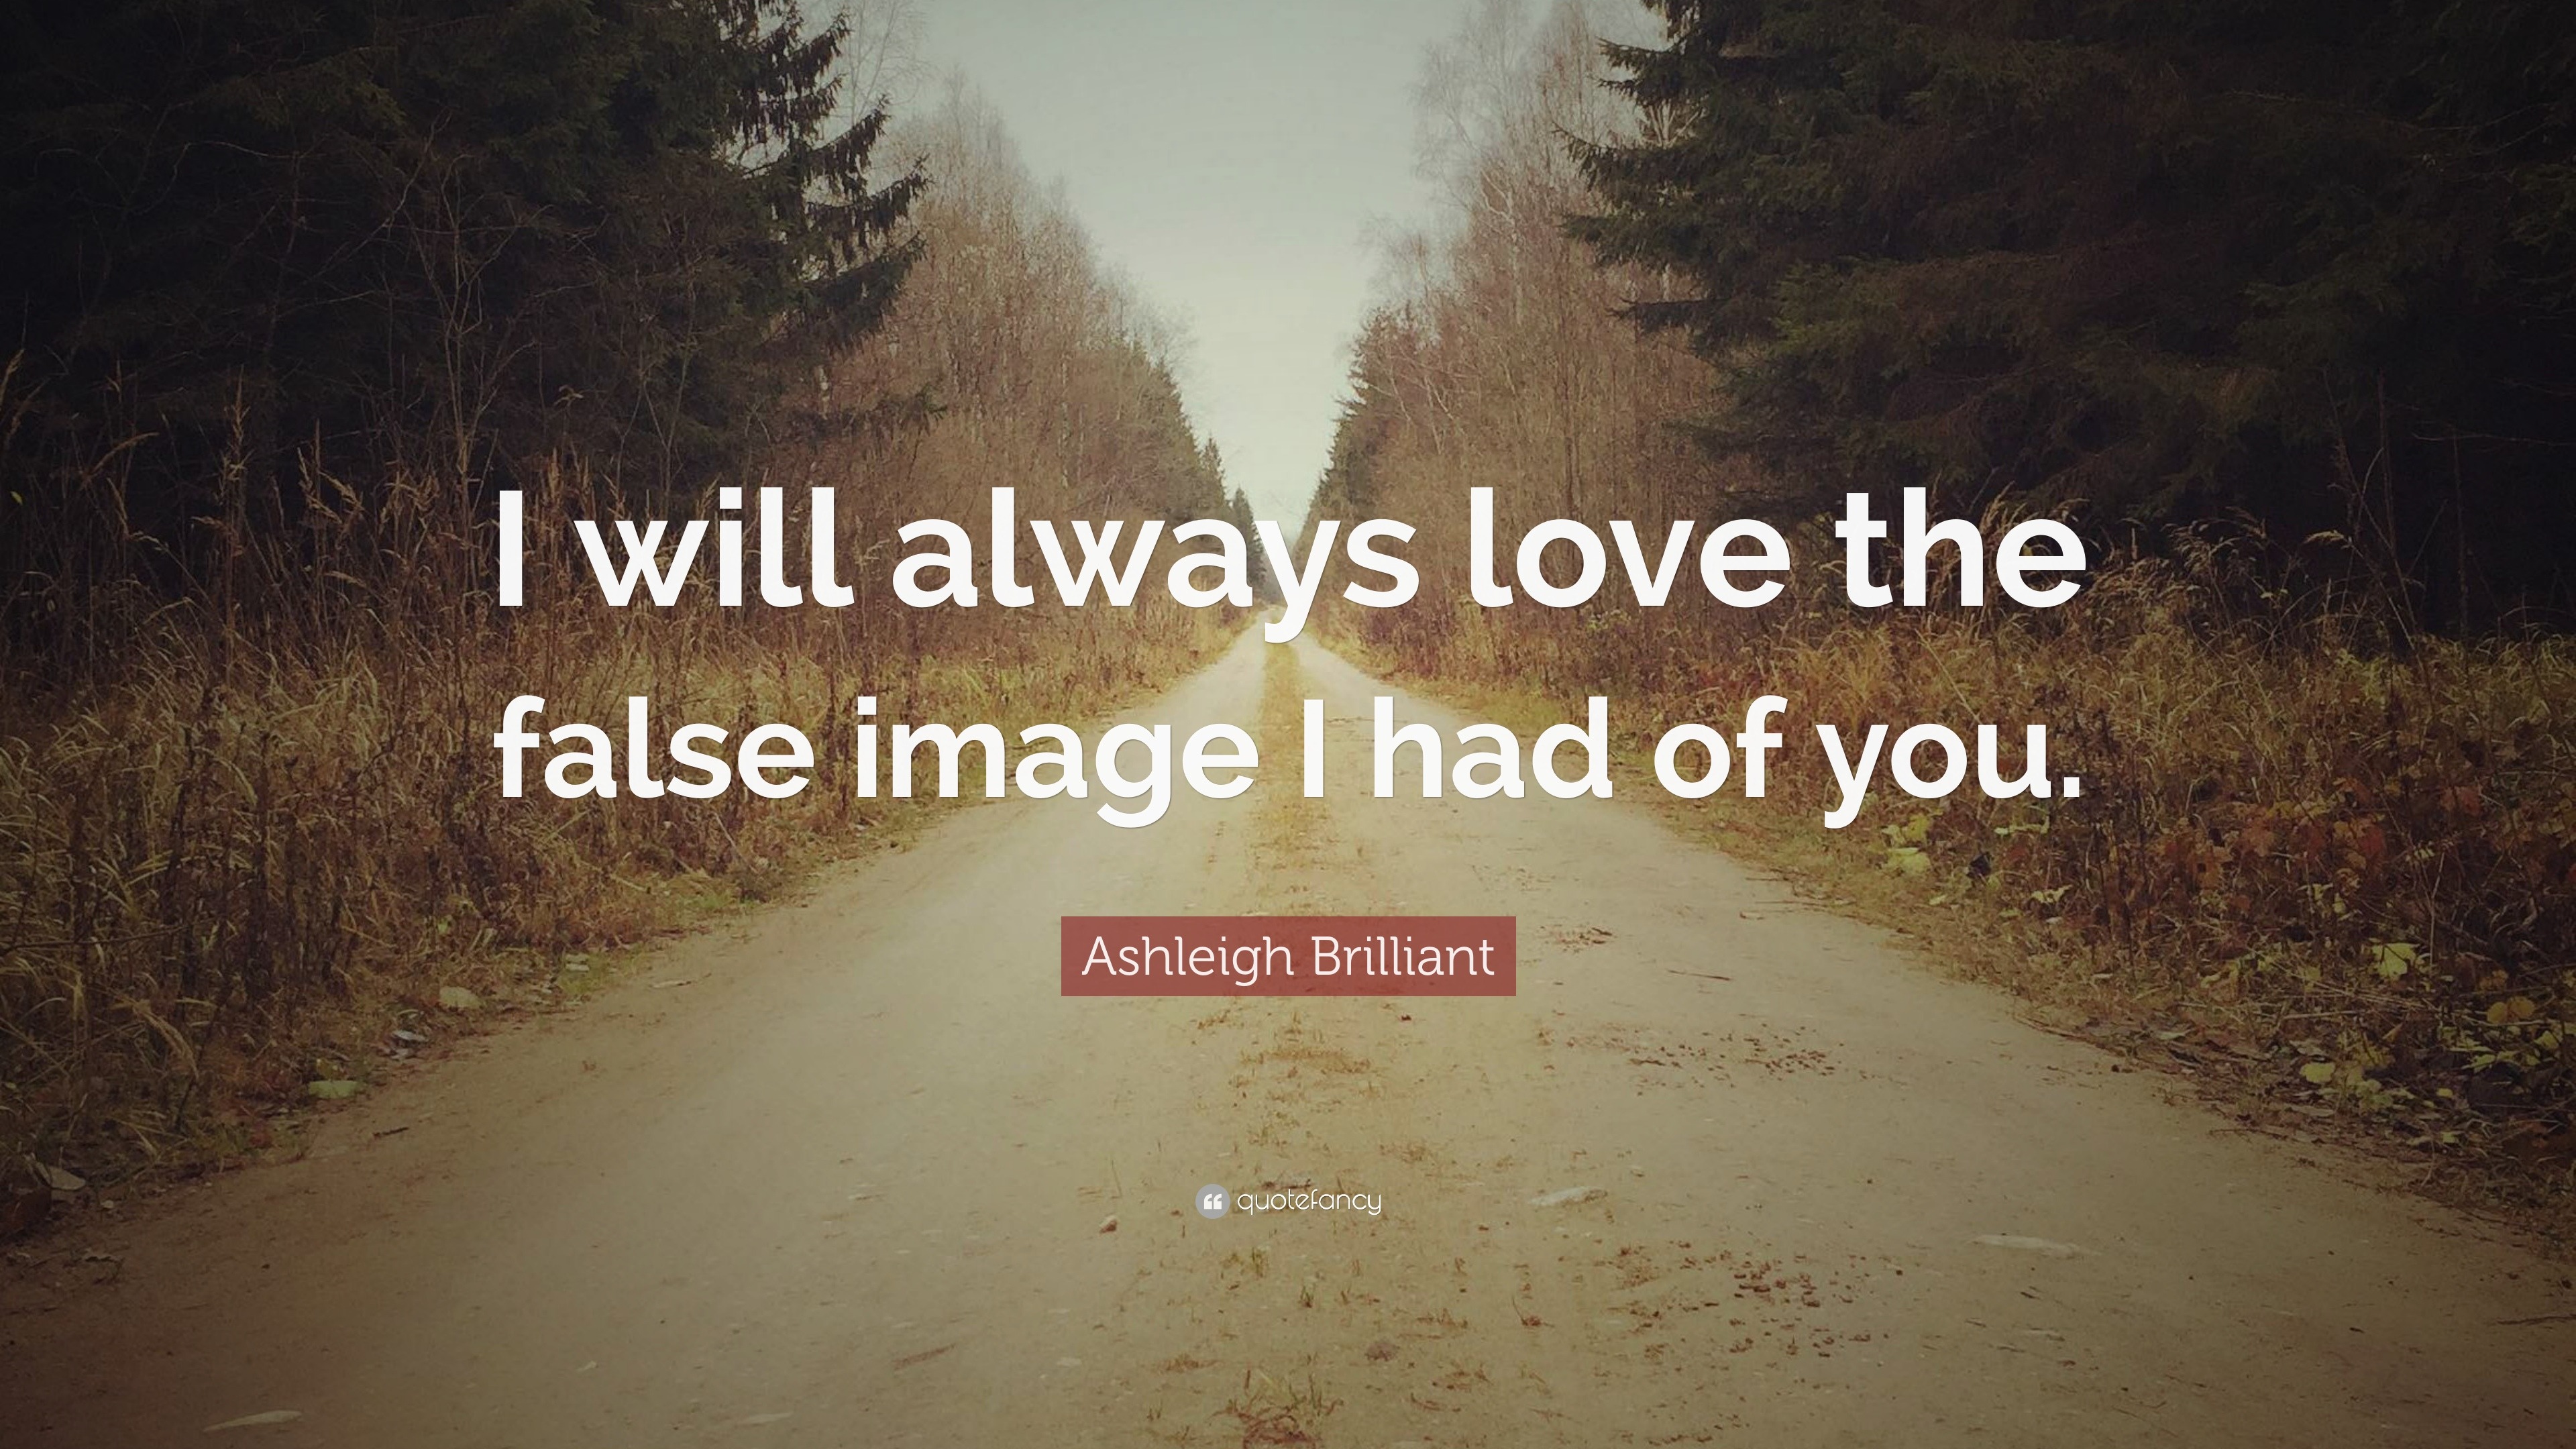 Ashleigh Brilliant Quote “I will always love the false image I had of you